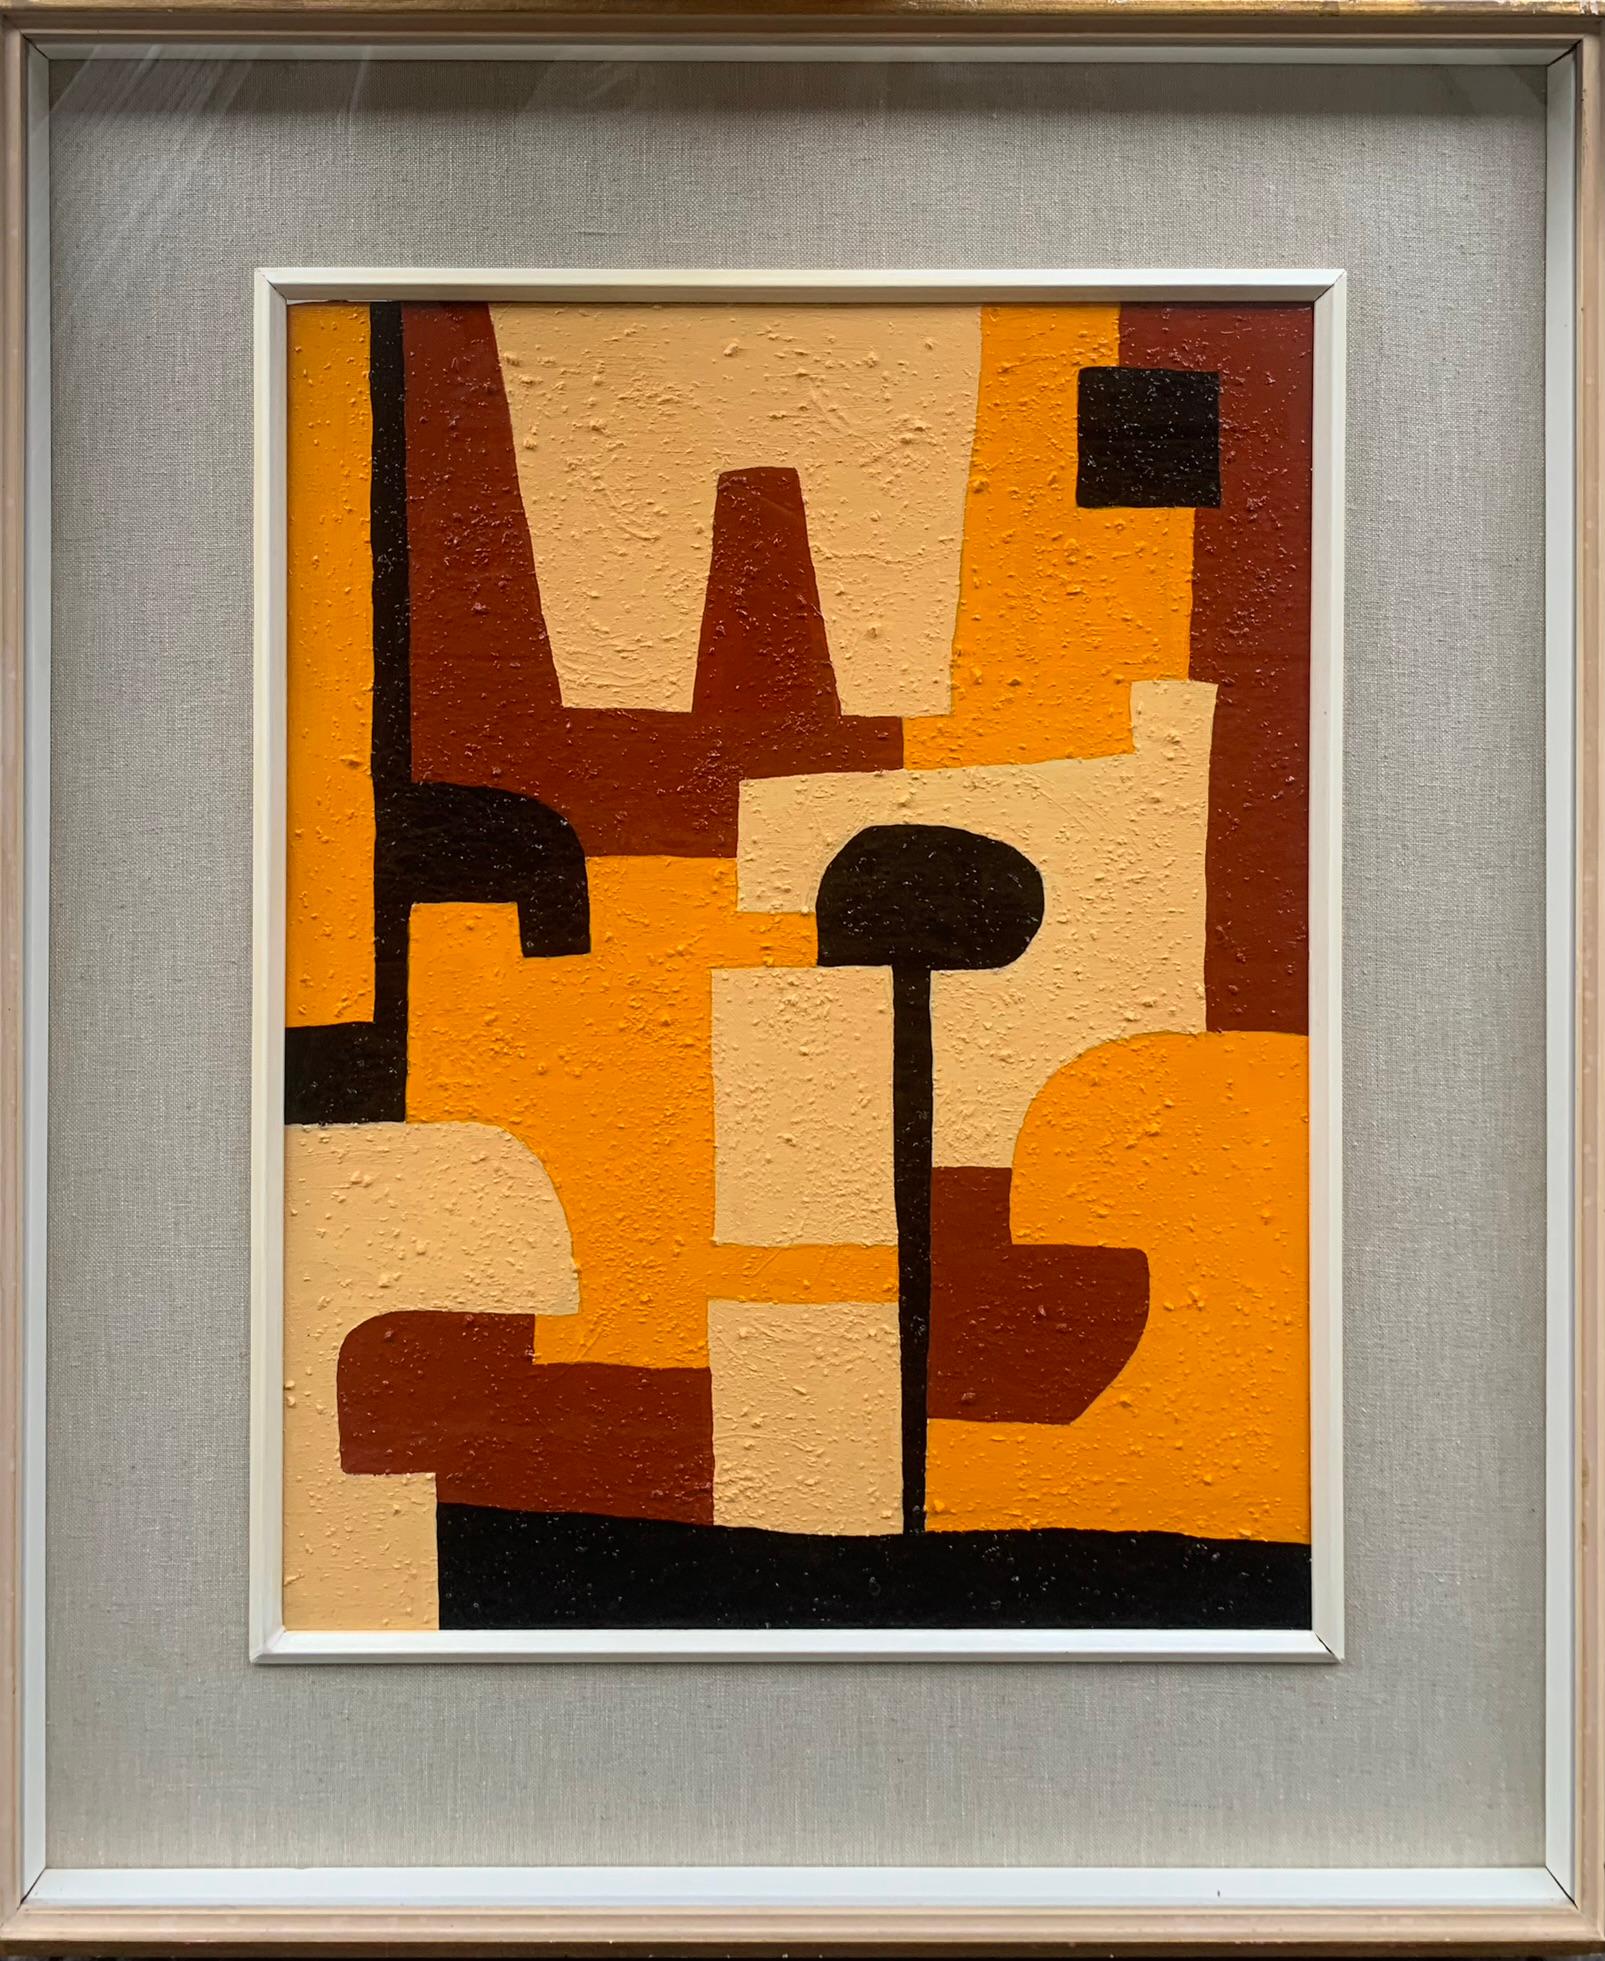 Geometric abstract painting.
1960-1970s.
Technique: oil on canvas with material, raw surface.
An avant-garde work of great expressiveness and decorative effect, where the geometry of the shapes transmits energy and the lively and irregular surface